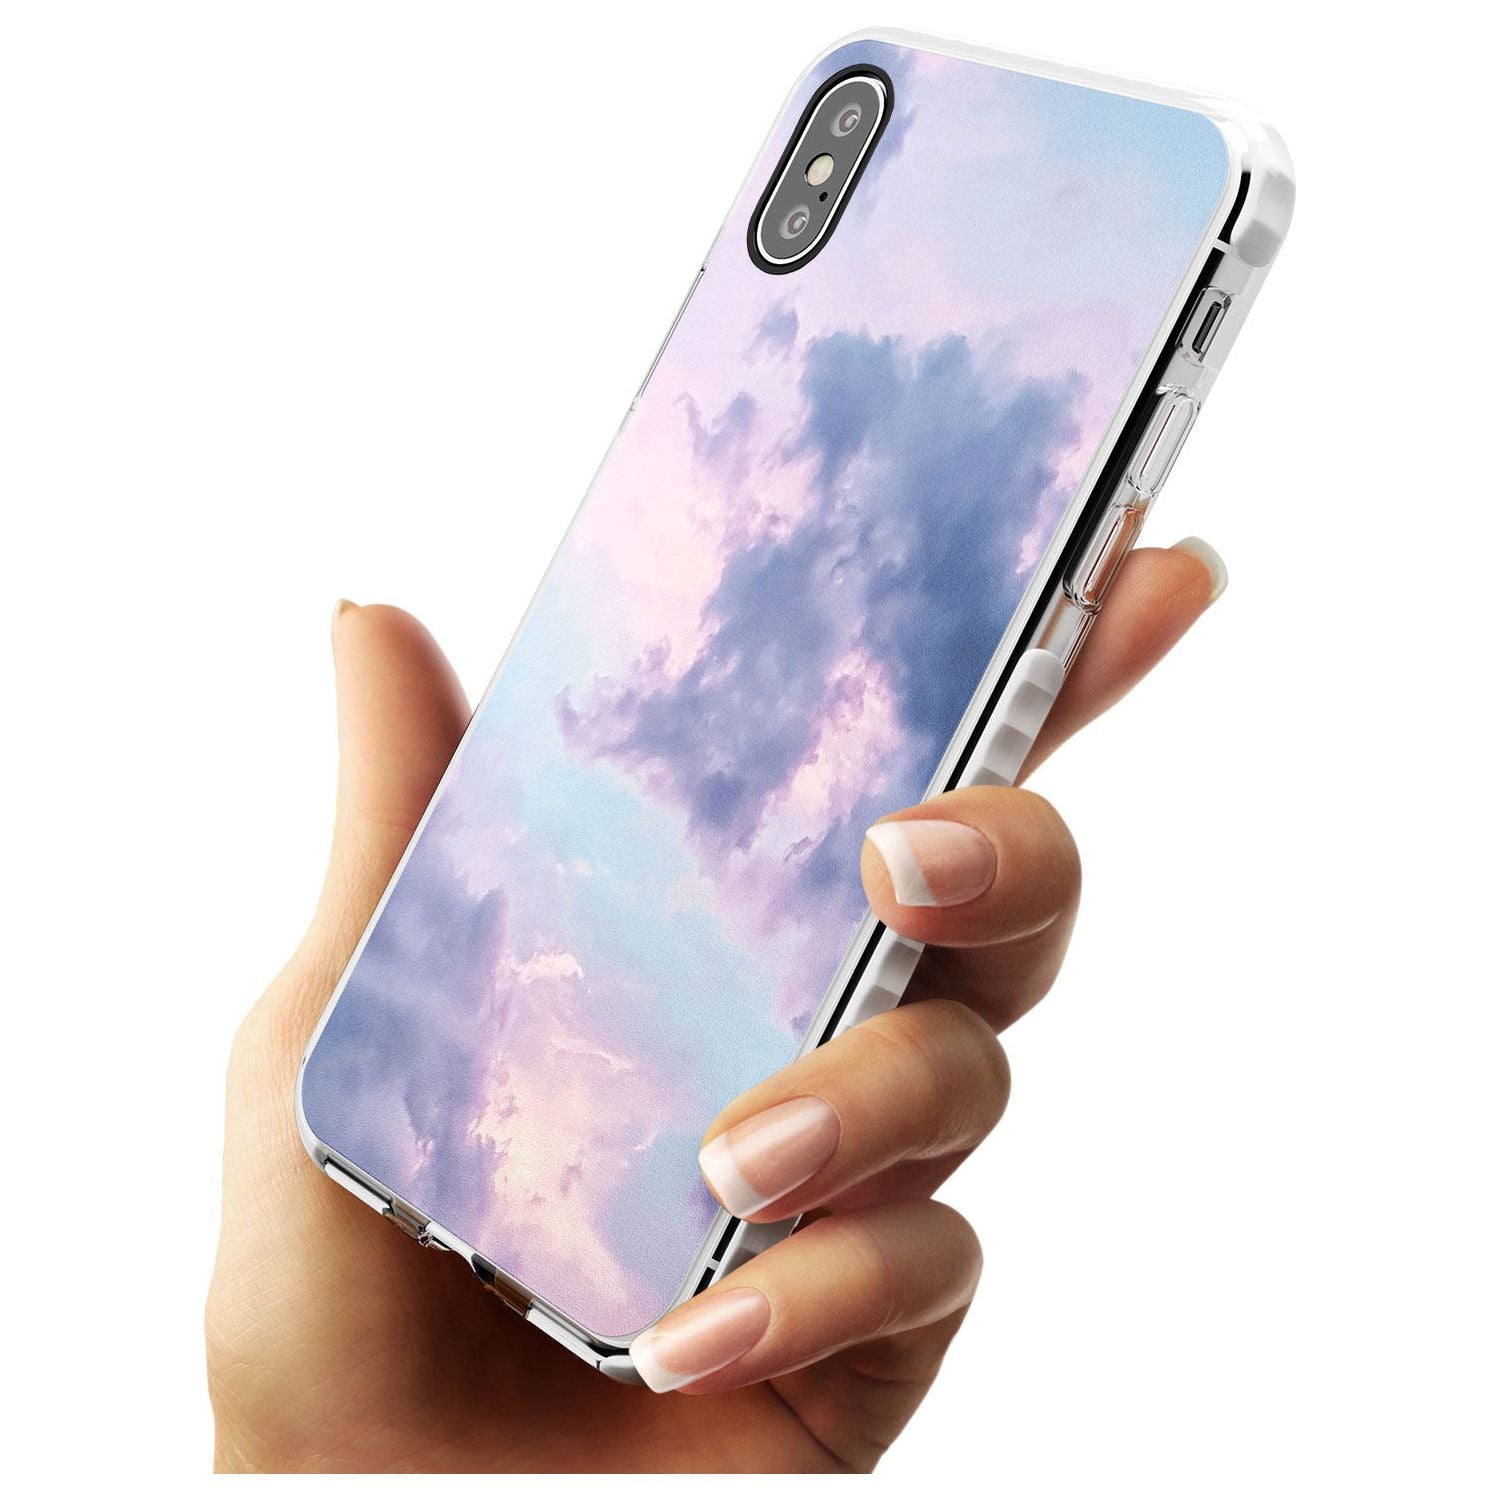 Purple Clouds Photograph Impact Phone Case for iPhone X XS Max XR